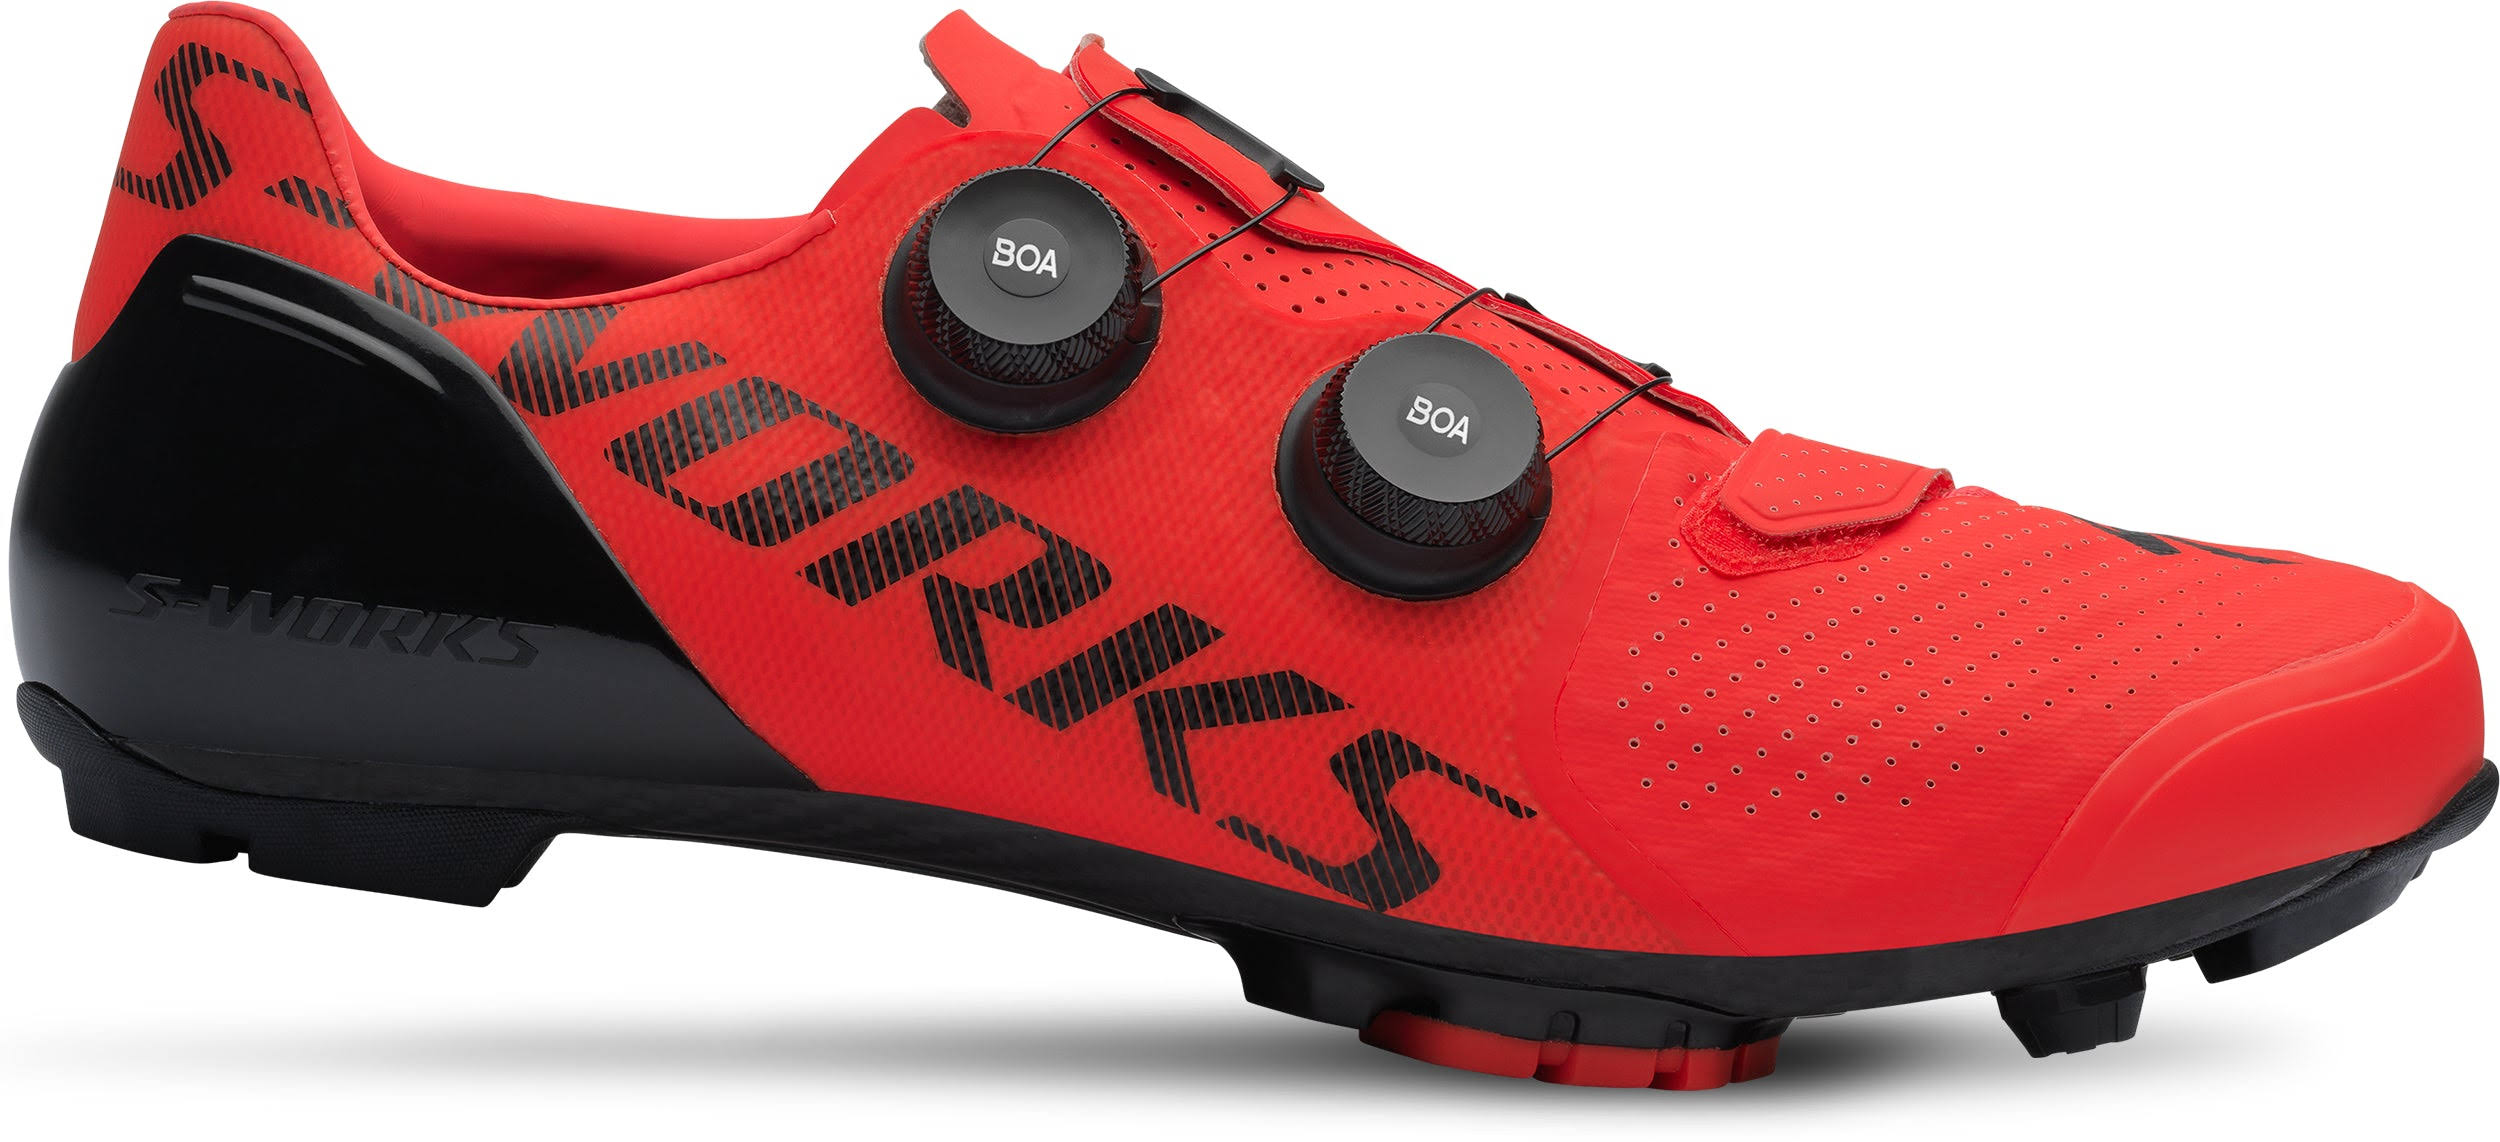 S-Works Recon Mtb Shoe Specialized Rocket Red